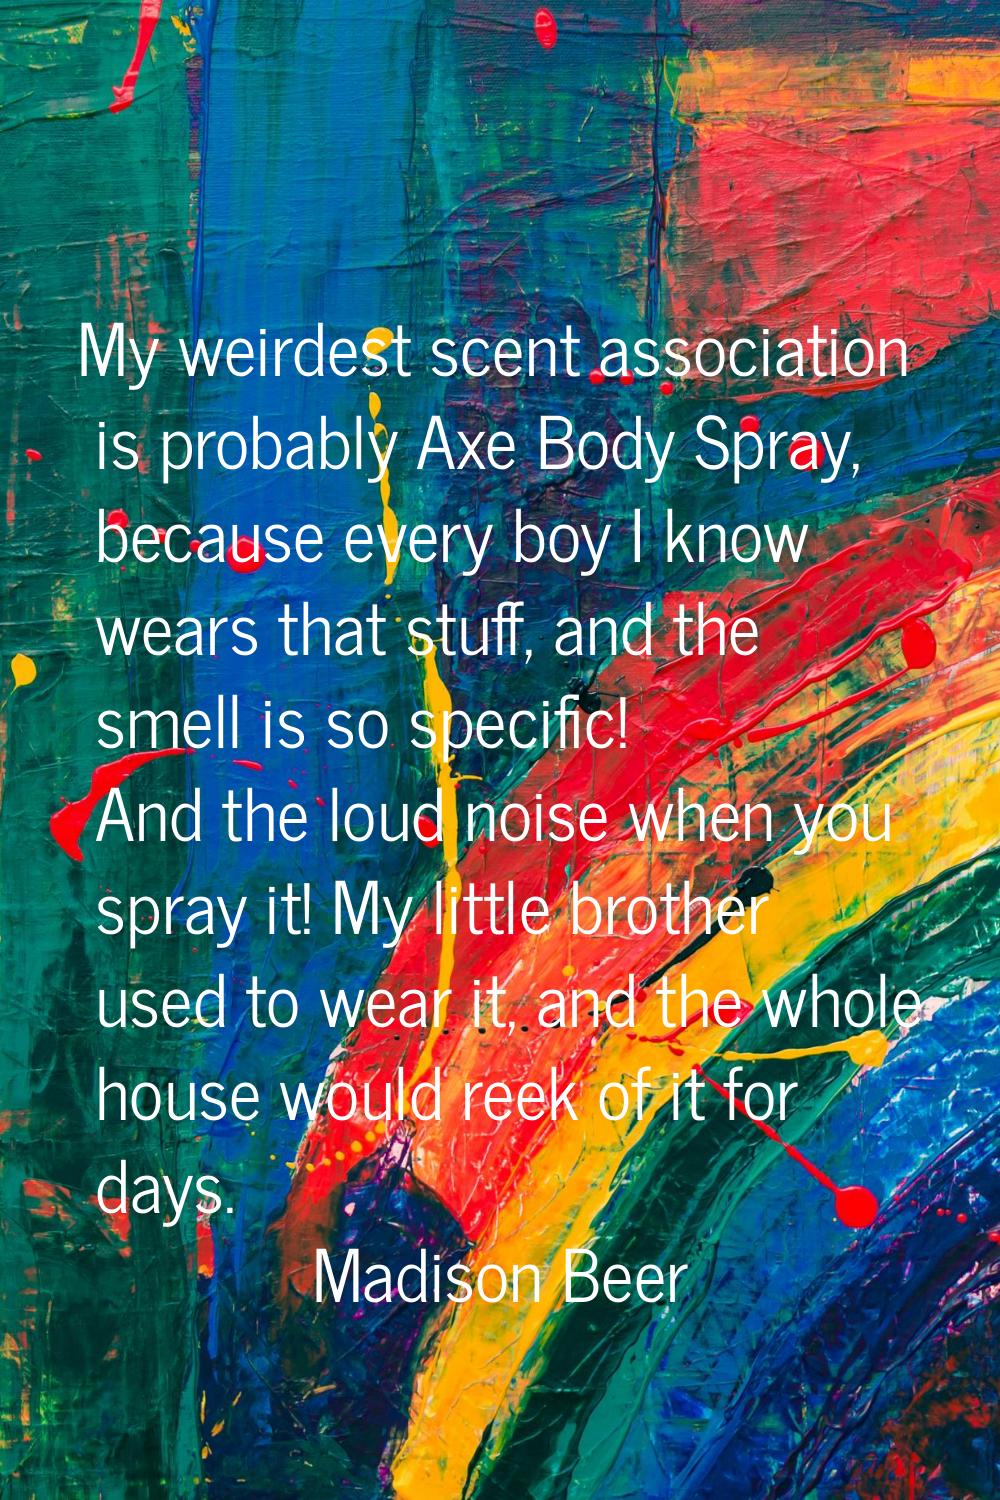 My weirdest scent association is probably Axe Body Spray, because every boy I know wears that stuff